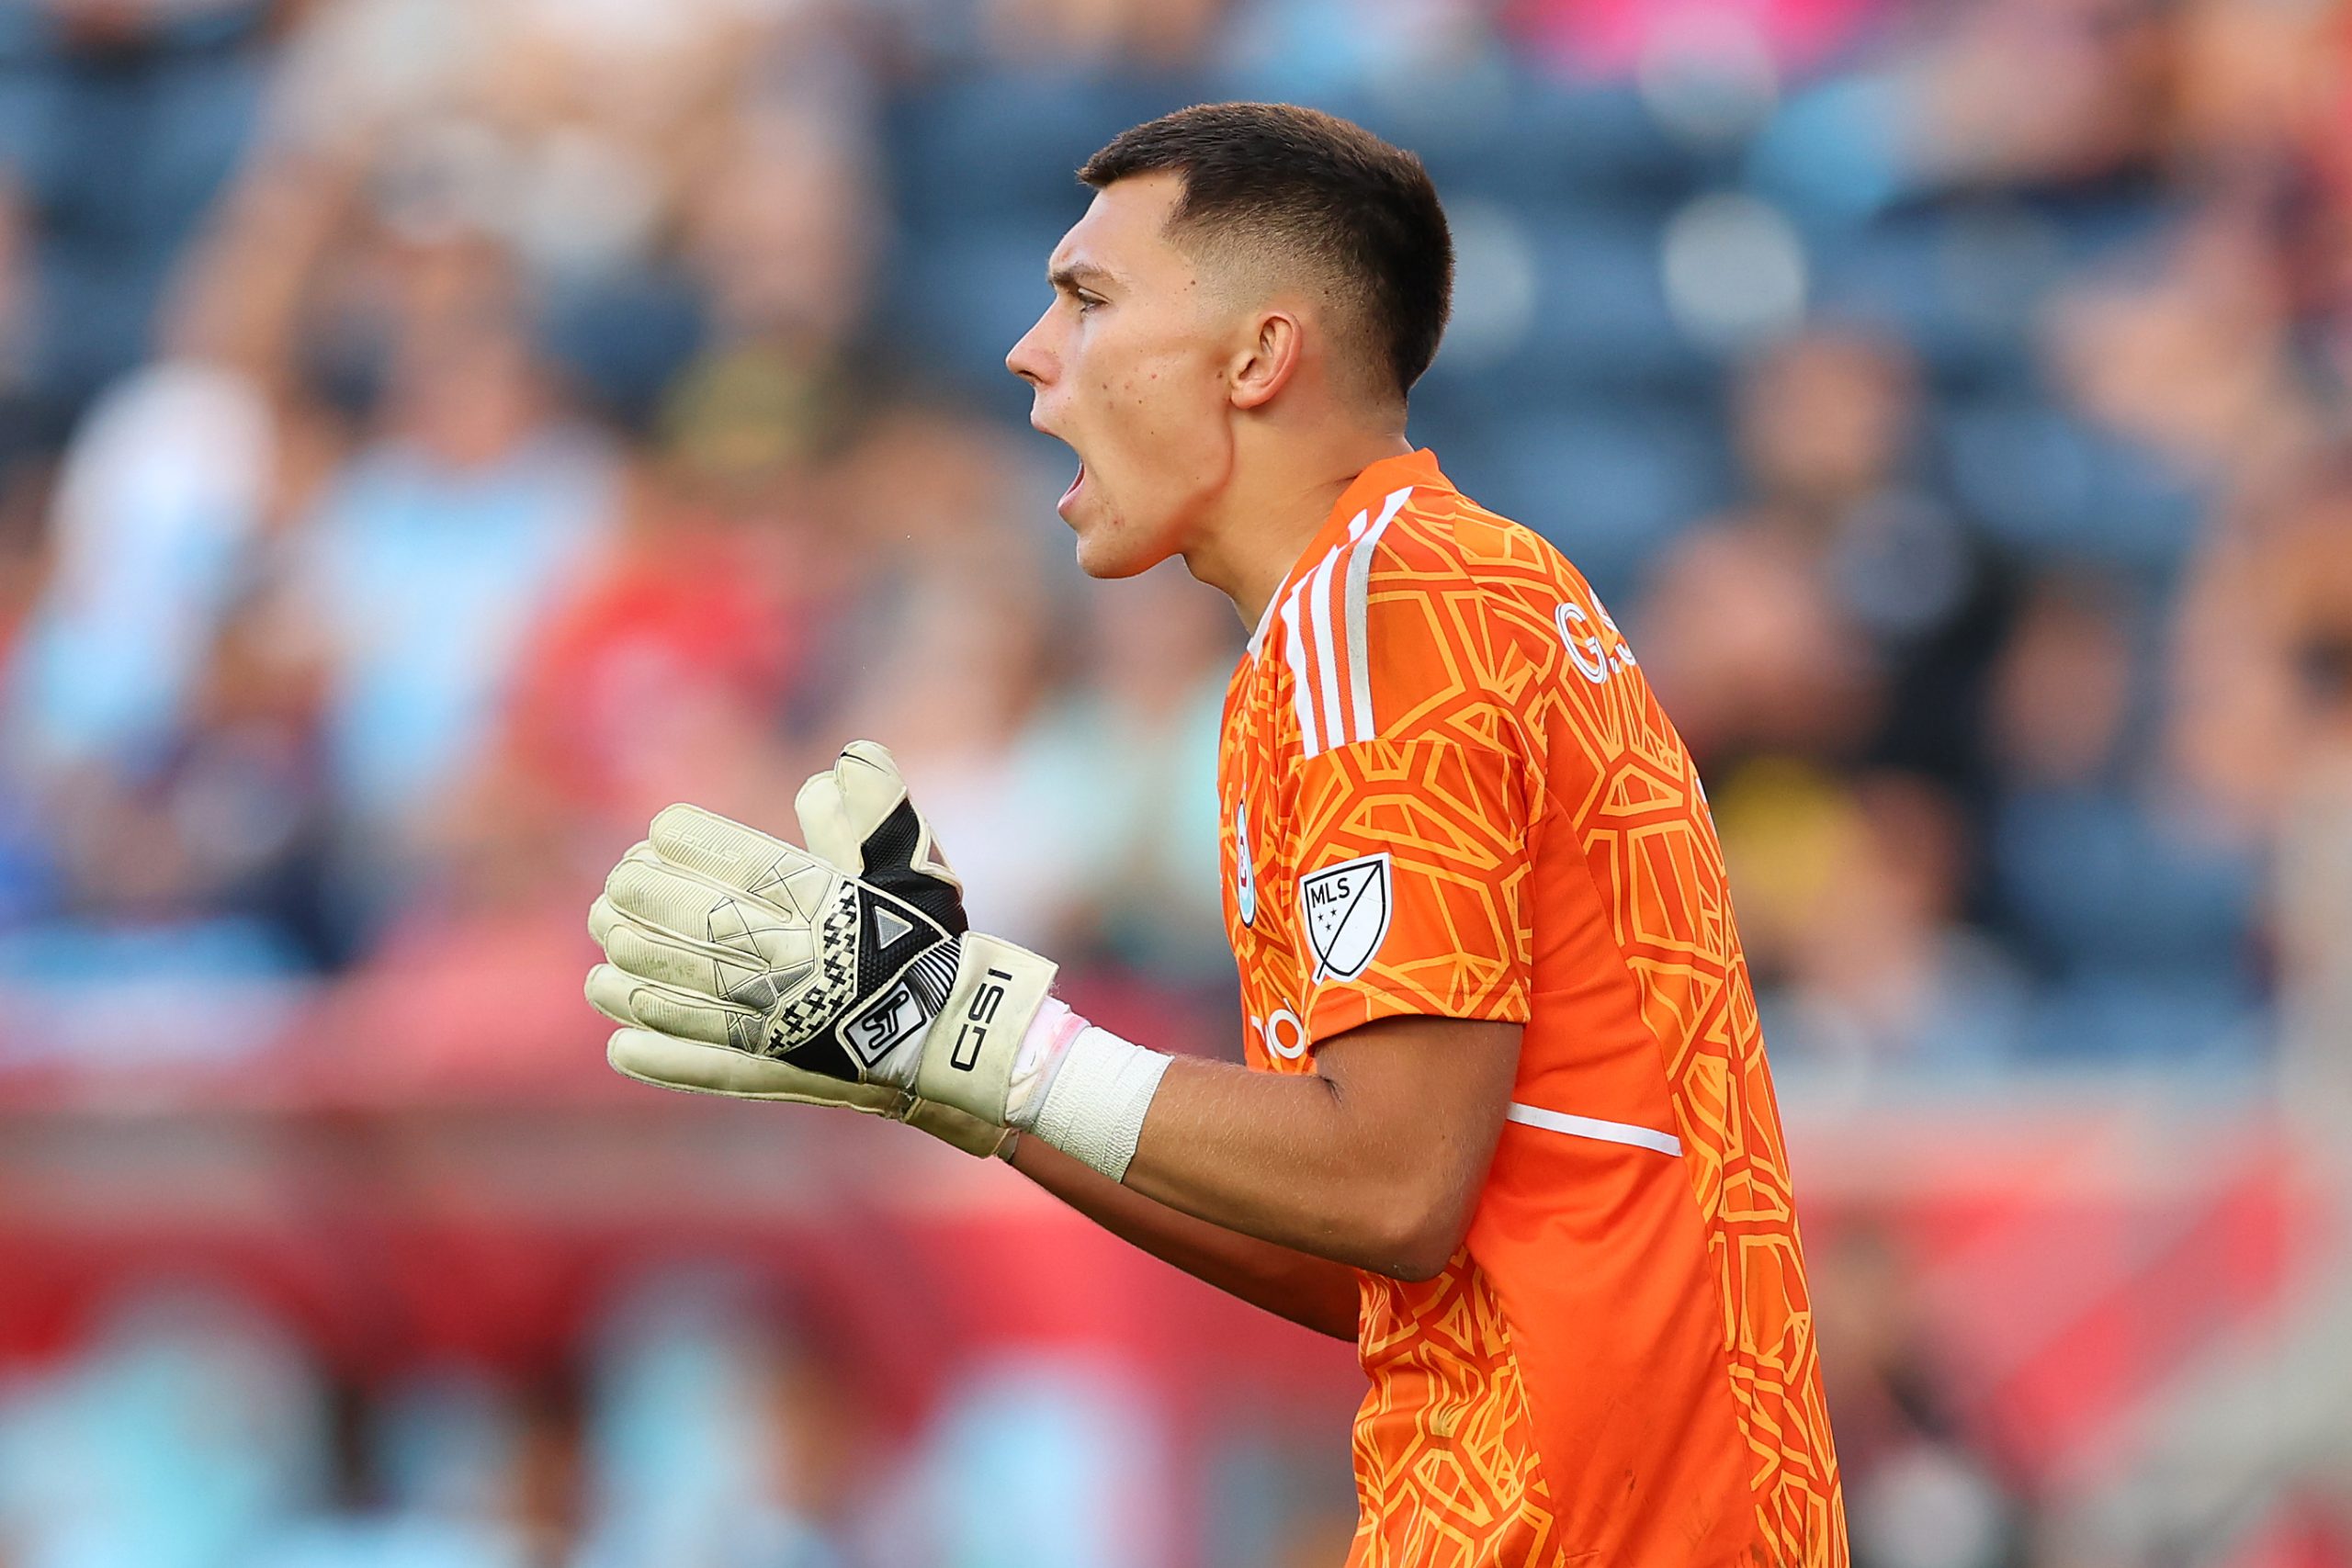 USMNT shot-stopper Gabriel Slonina expected to stay with Chelsea not keen on January loan.